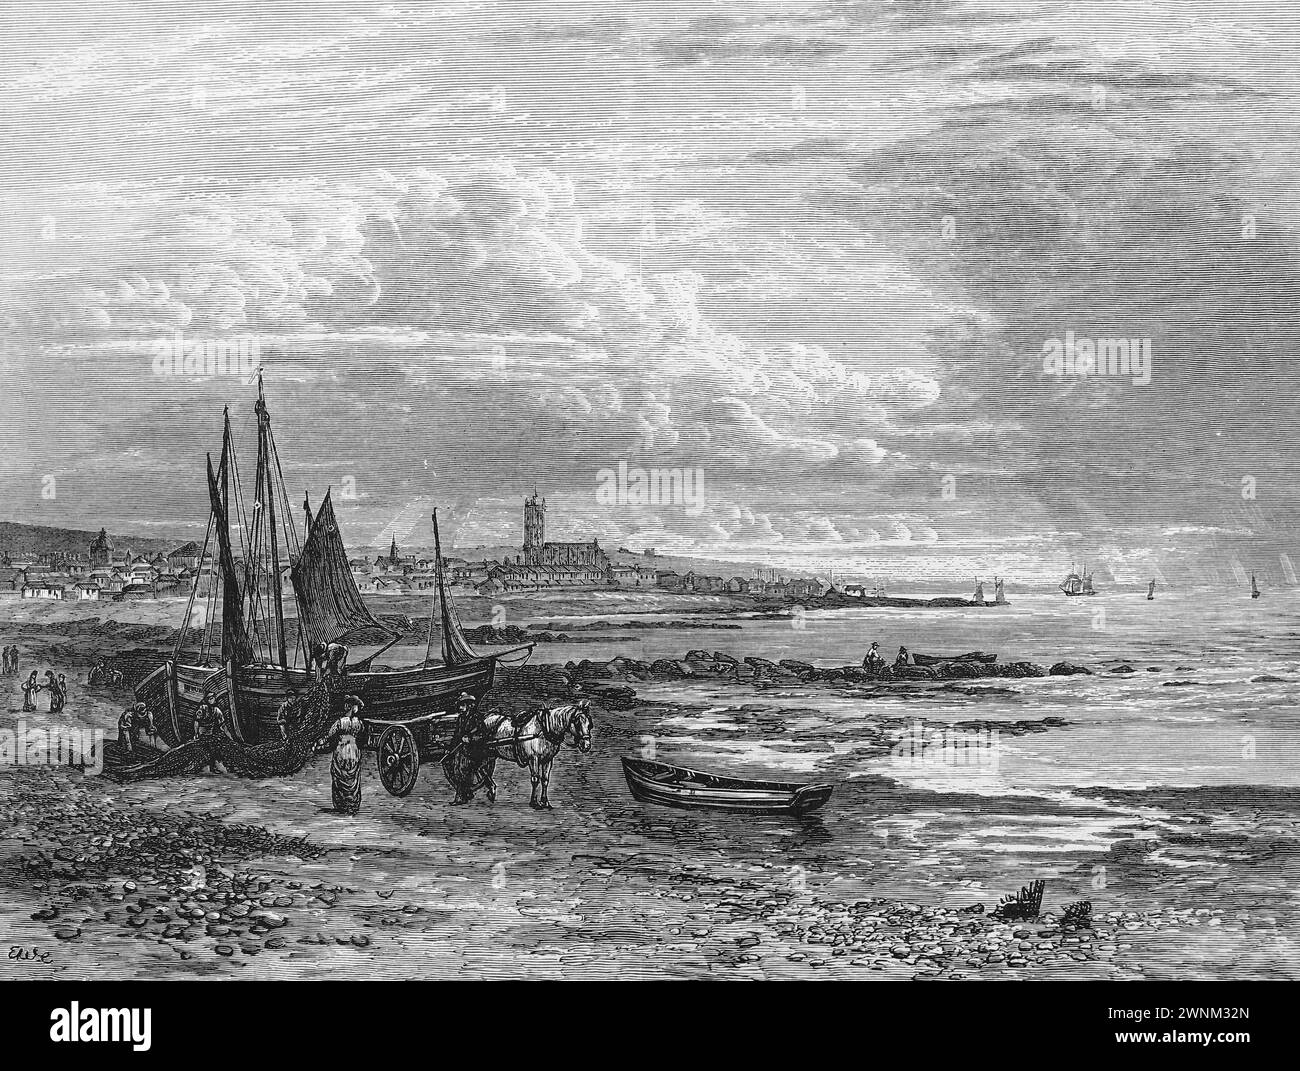 Penzance, Cornwall in the 19th century; Black and white illustration from 'Our Own Country' a Descriptive, Historical and Pictorial guide to the UK published in late 1880s by Cassell, Petter, Galpin & Co. Historic pictures of Briatin. Stock Photo